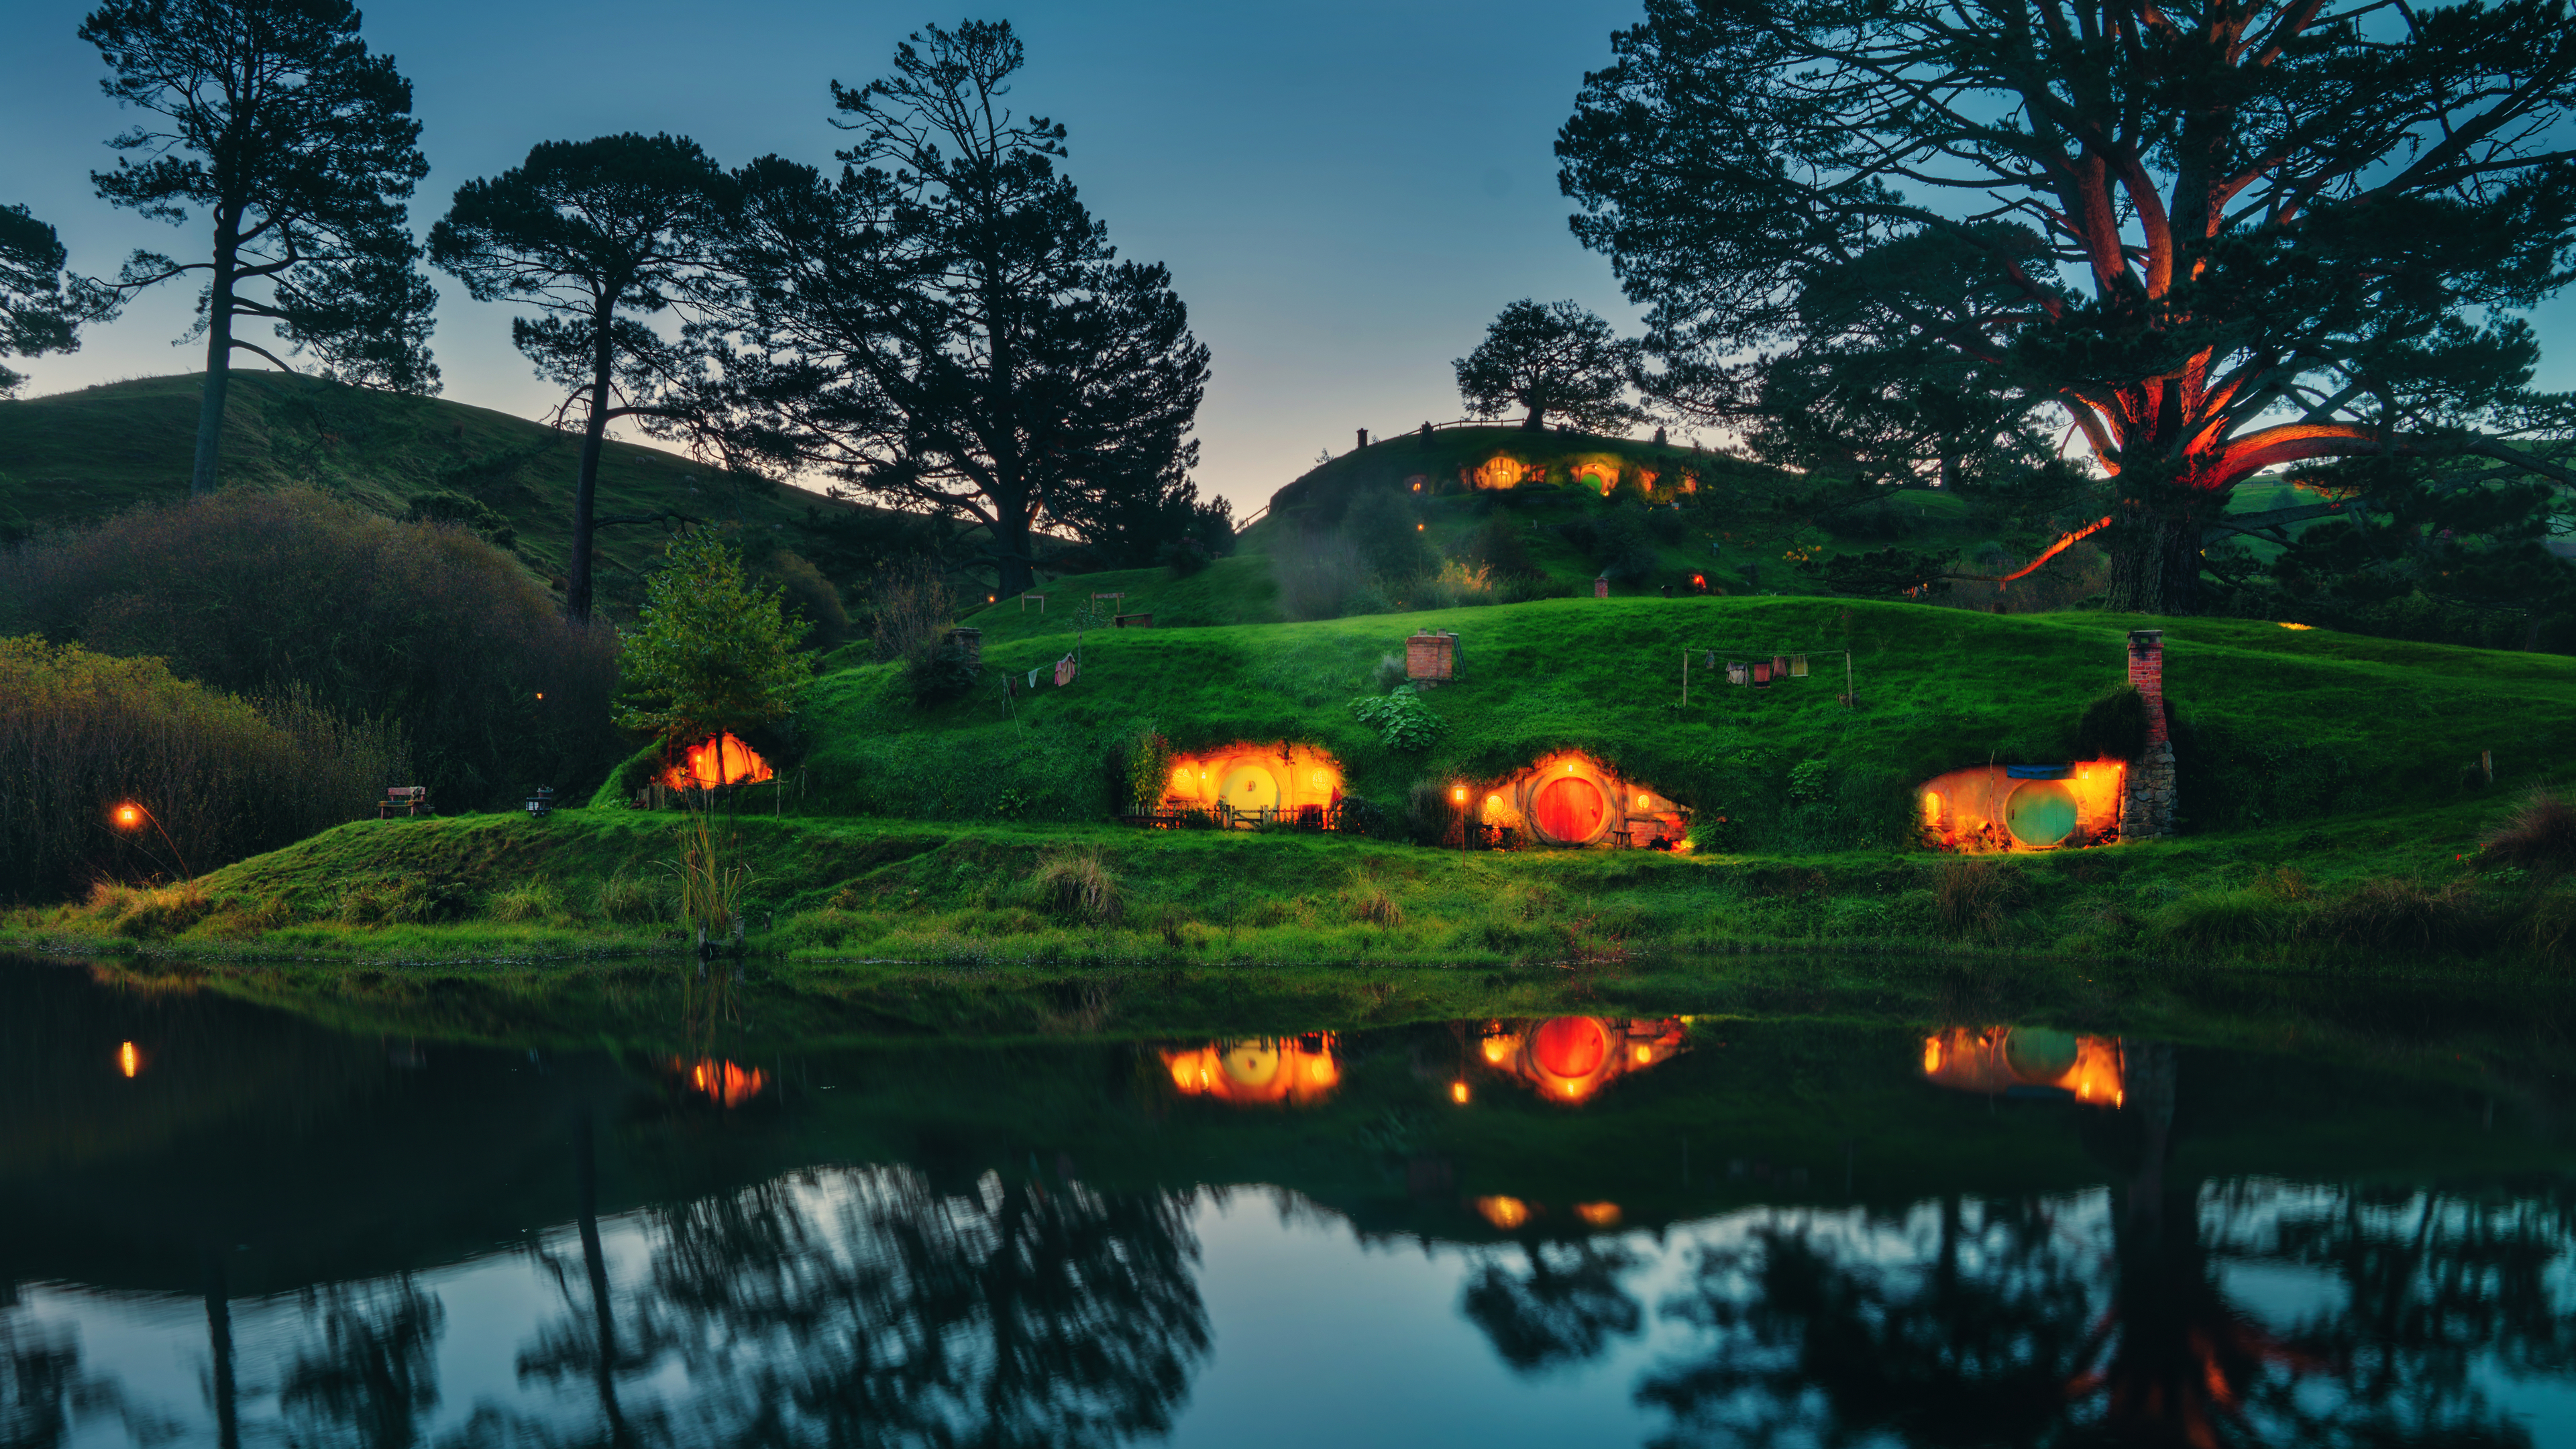 General 3840x2160 Trey Ratcliff photography landscape 4K New Zealand nature Hobbiton water reflection grass The Shire The Lord of the Rings J. R. R. Tolkien